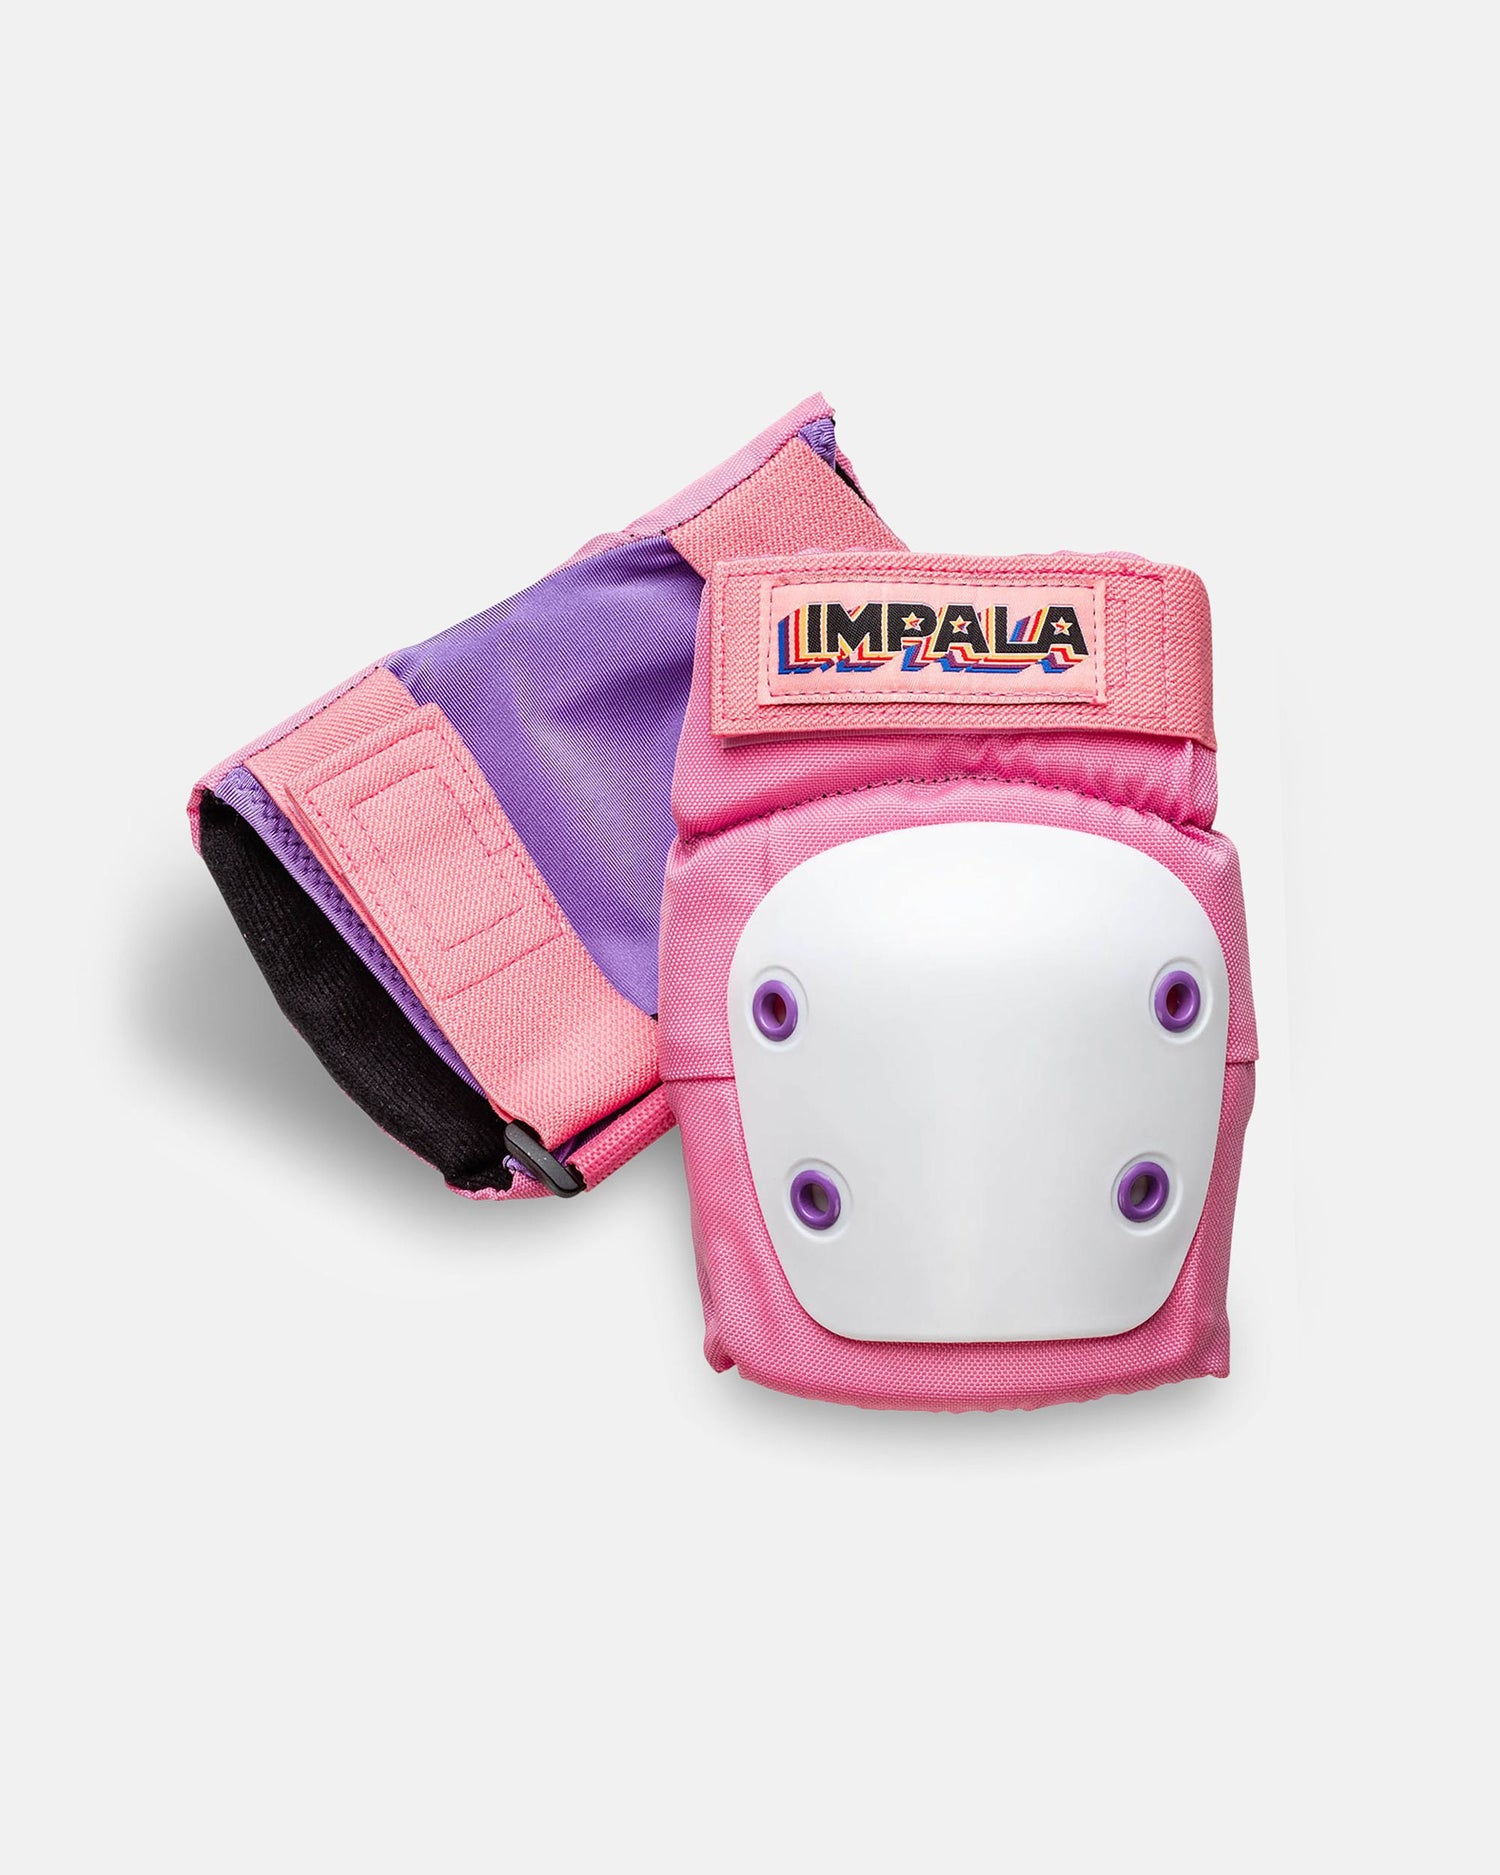 Elbow pad in the Impala Protective Set - Pink